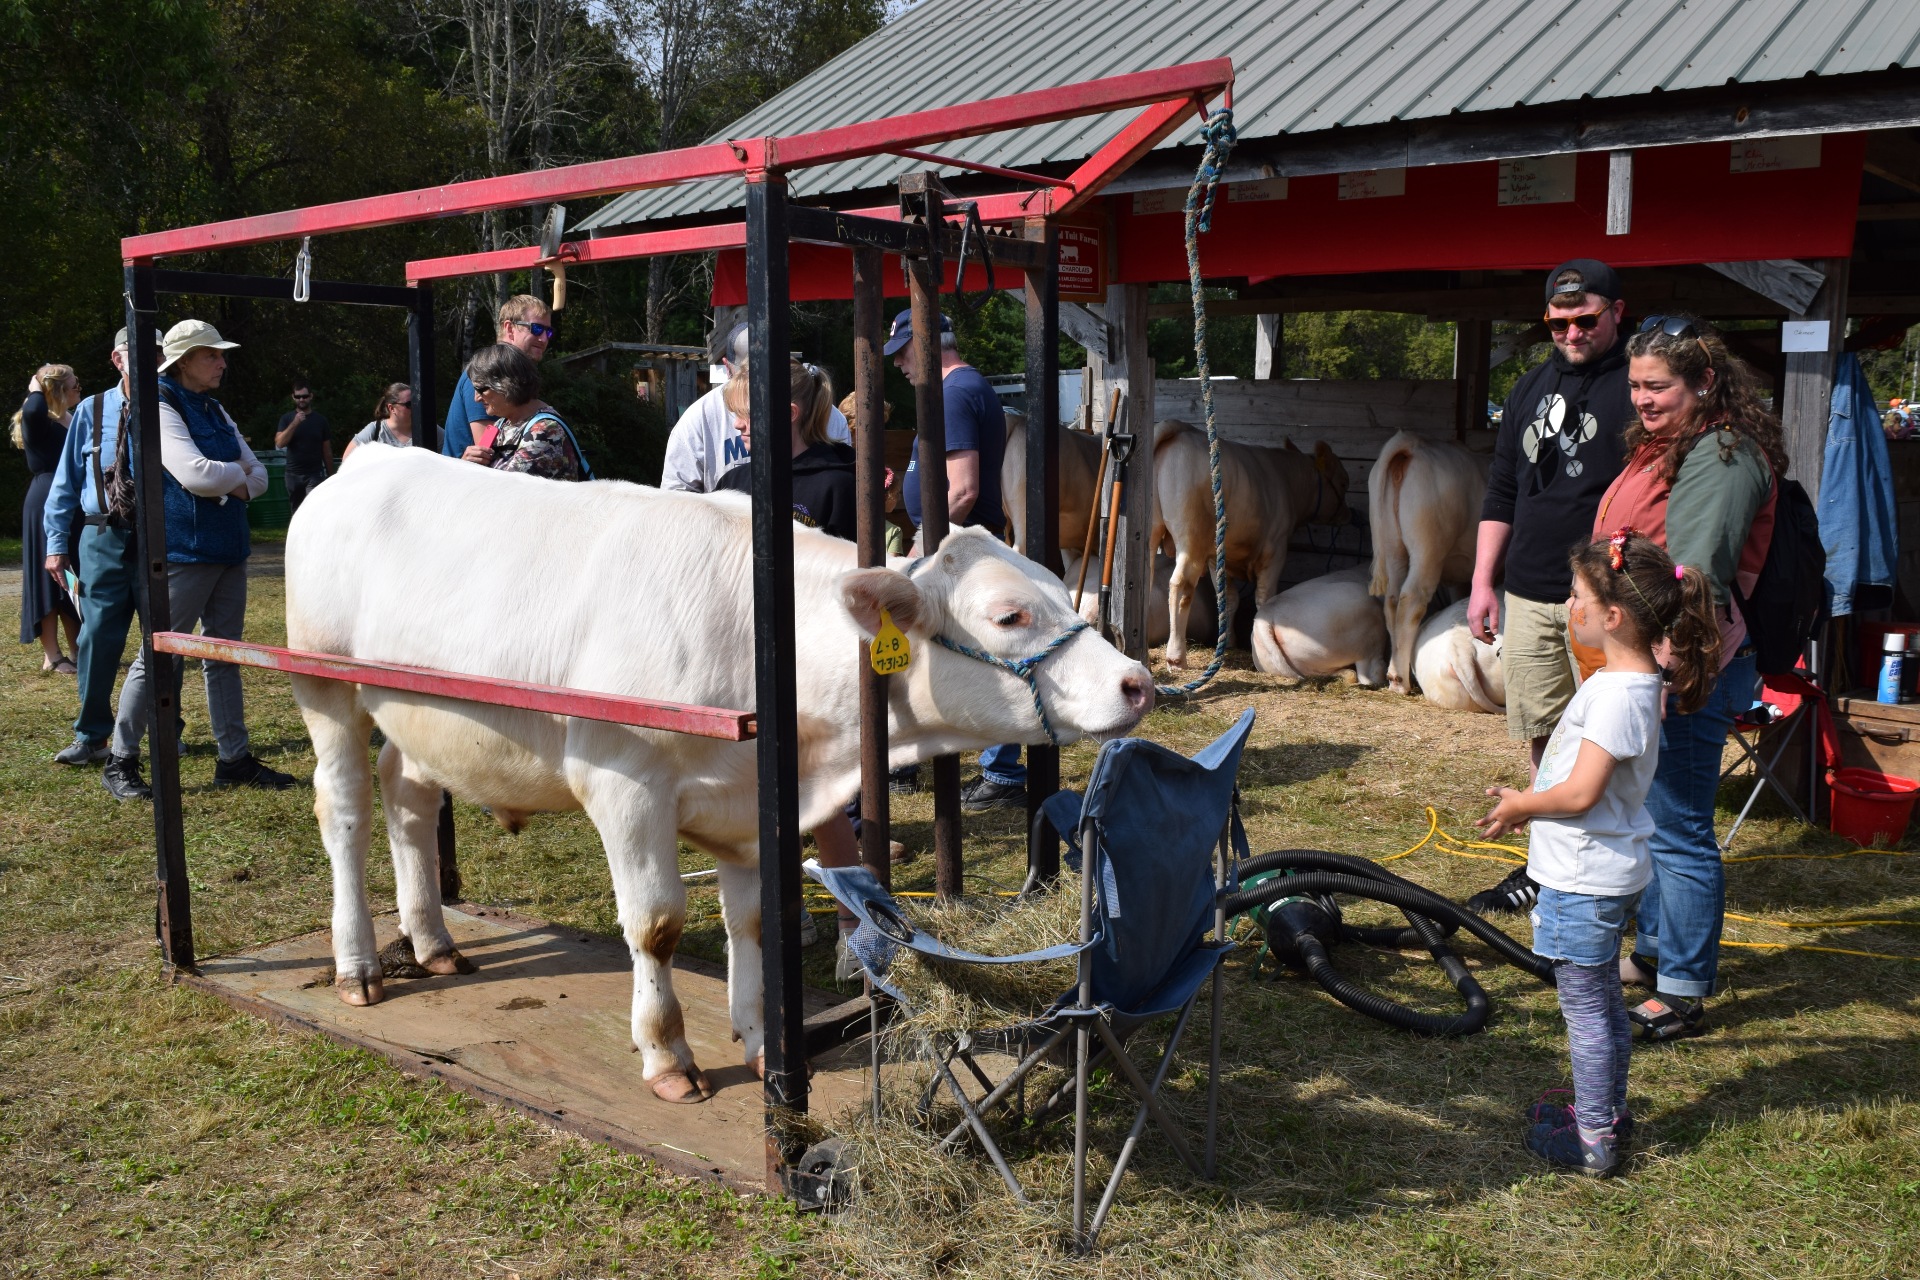 A white cow stands eating hay out of a blue folding chair as people mill around. In the background a barn with additional animals is visible.